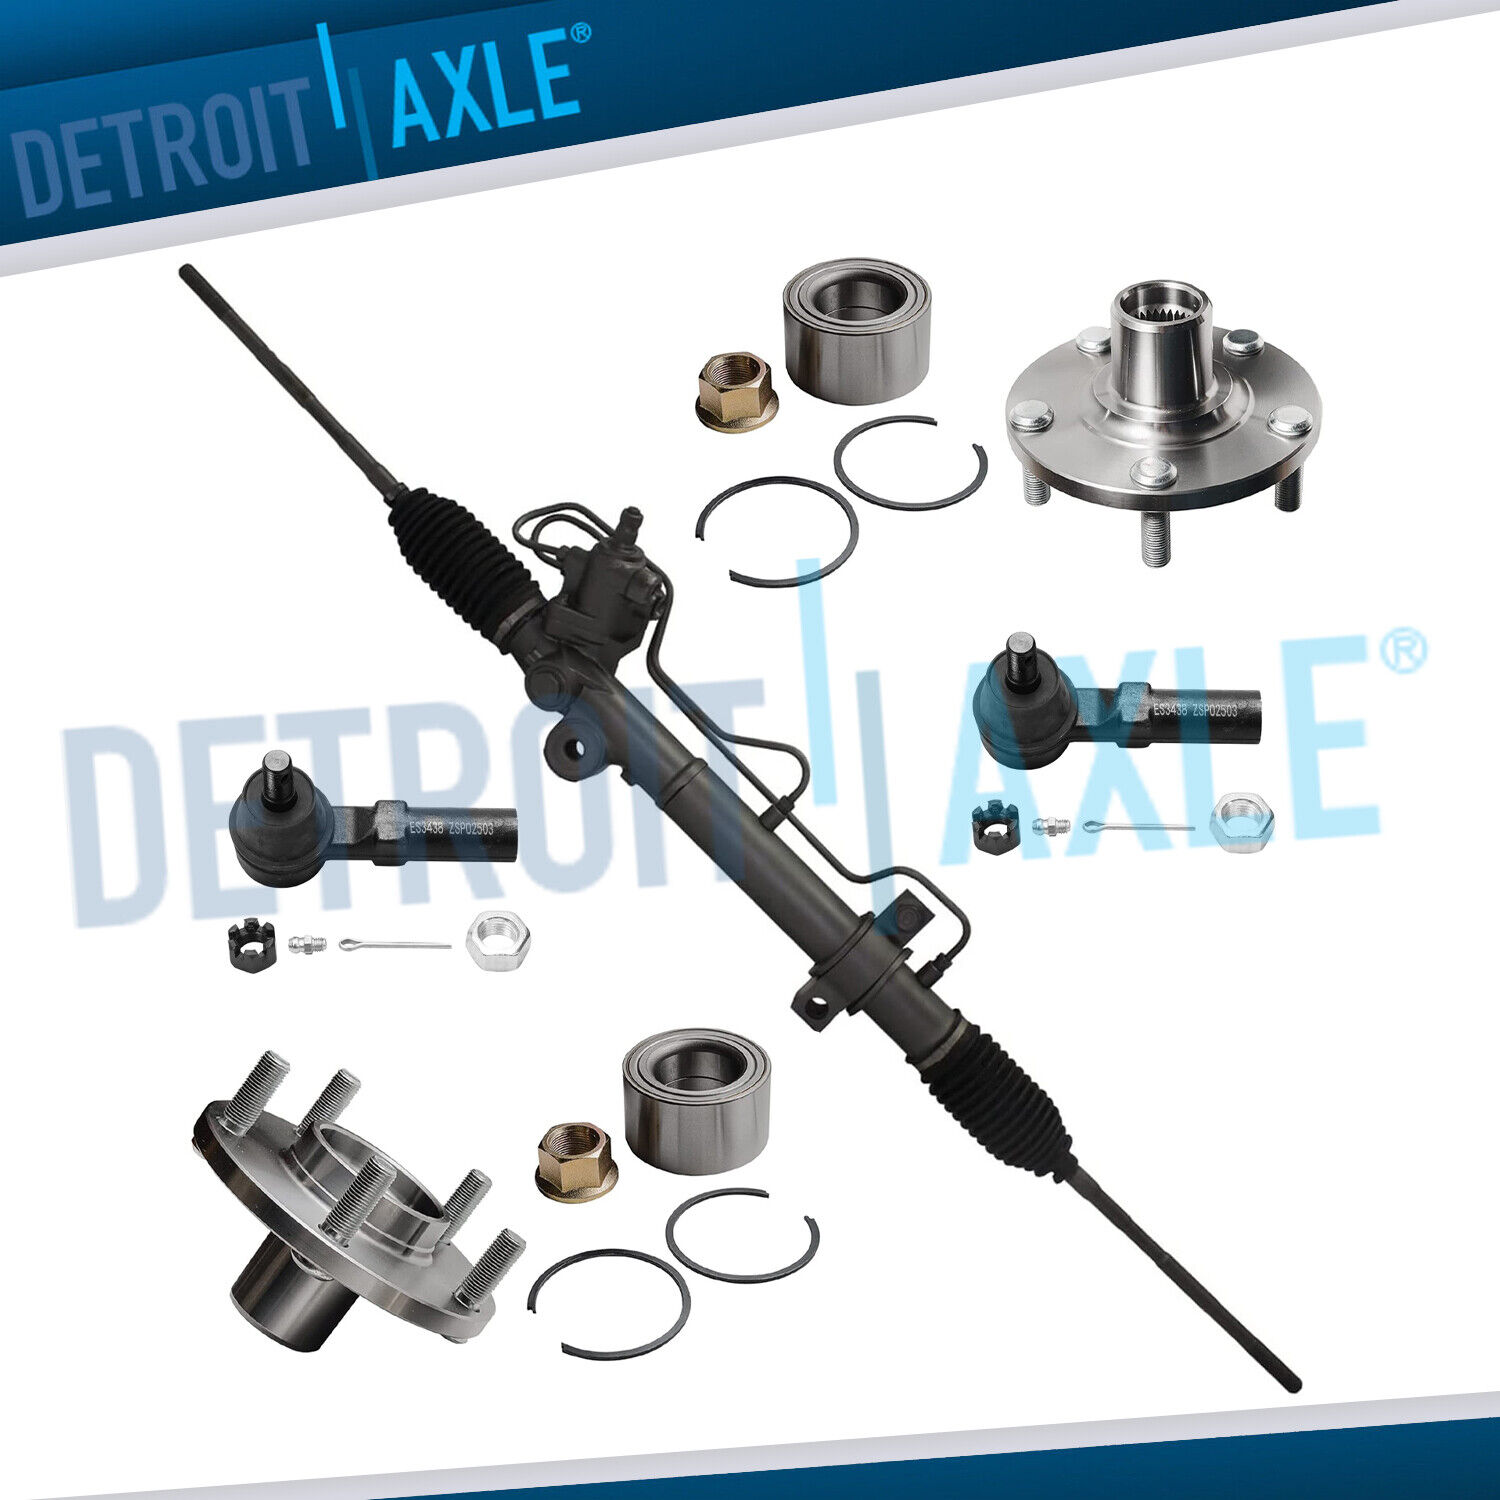 5 pc Steering Rack and Pinion Wheel Hub and Bearing Kit for Nissan Altima Maxima